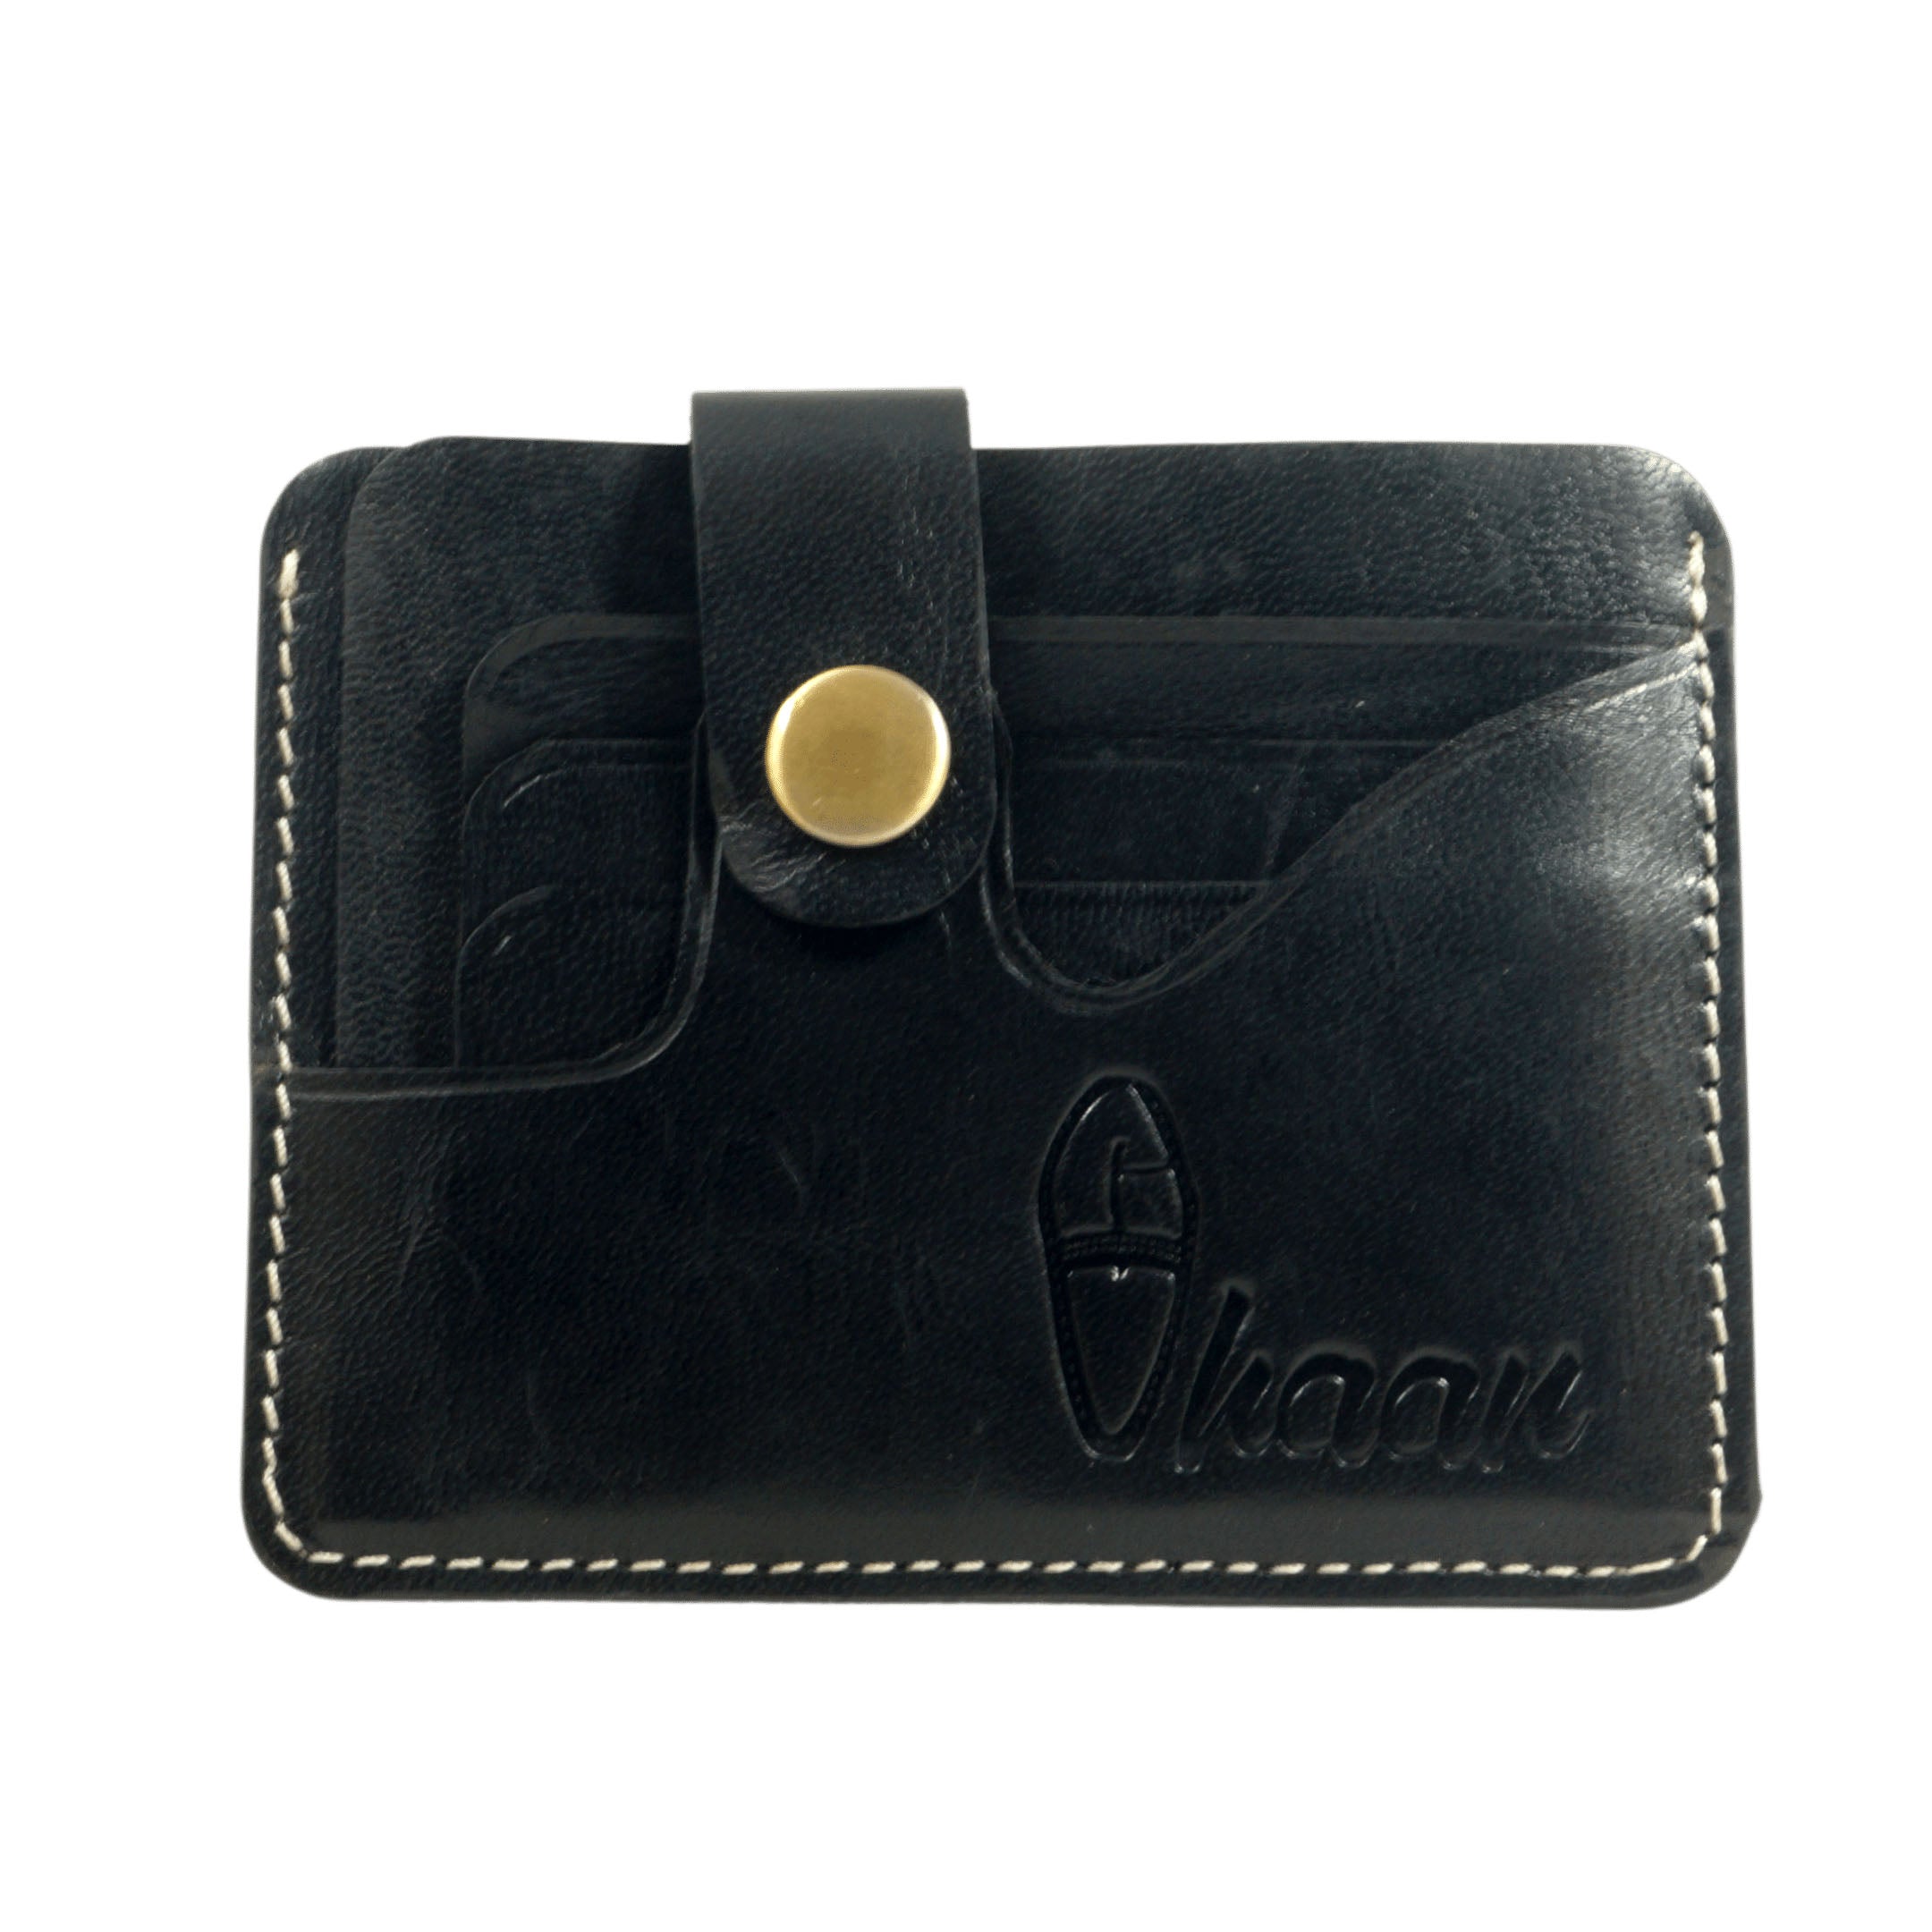 Vhaan handcrafted leather card holder in premium genuine leather